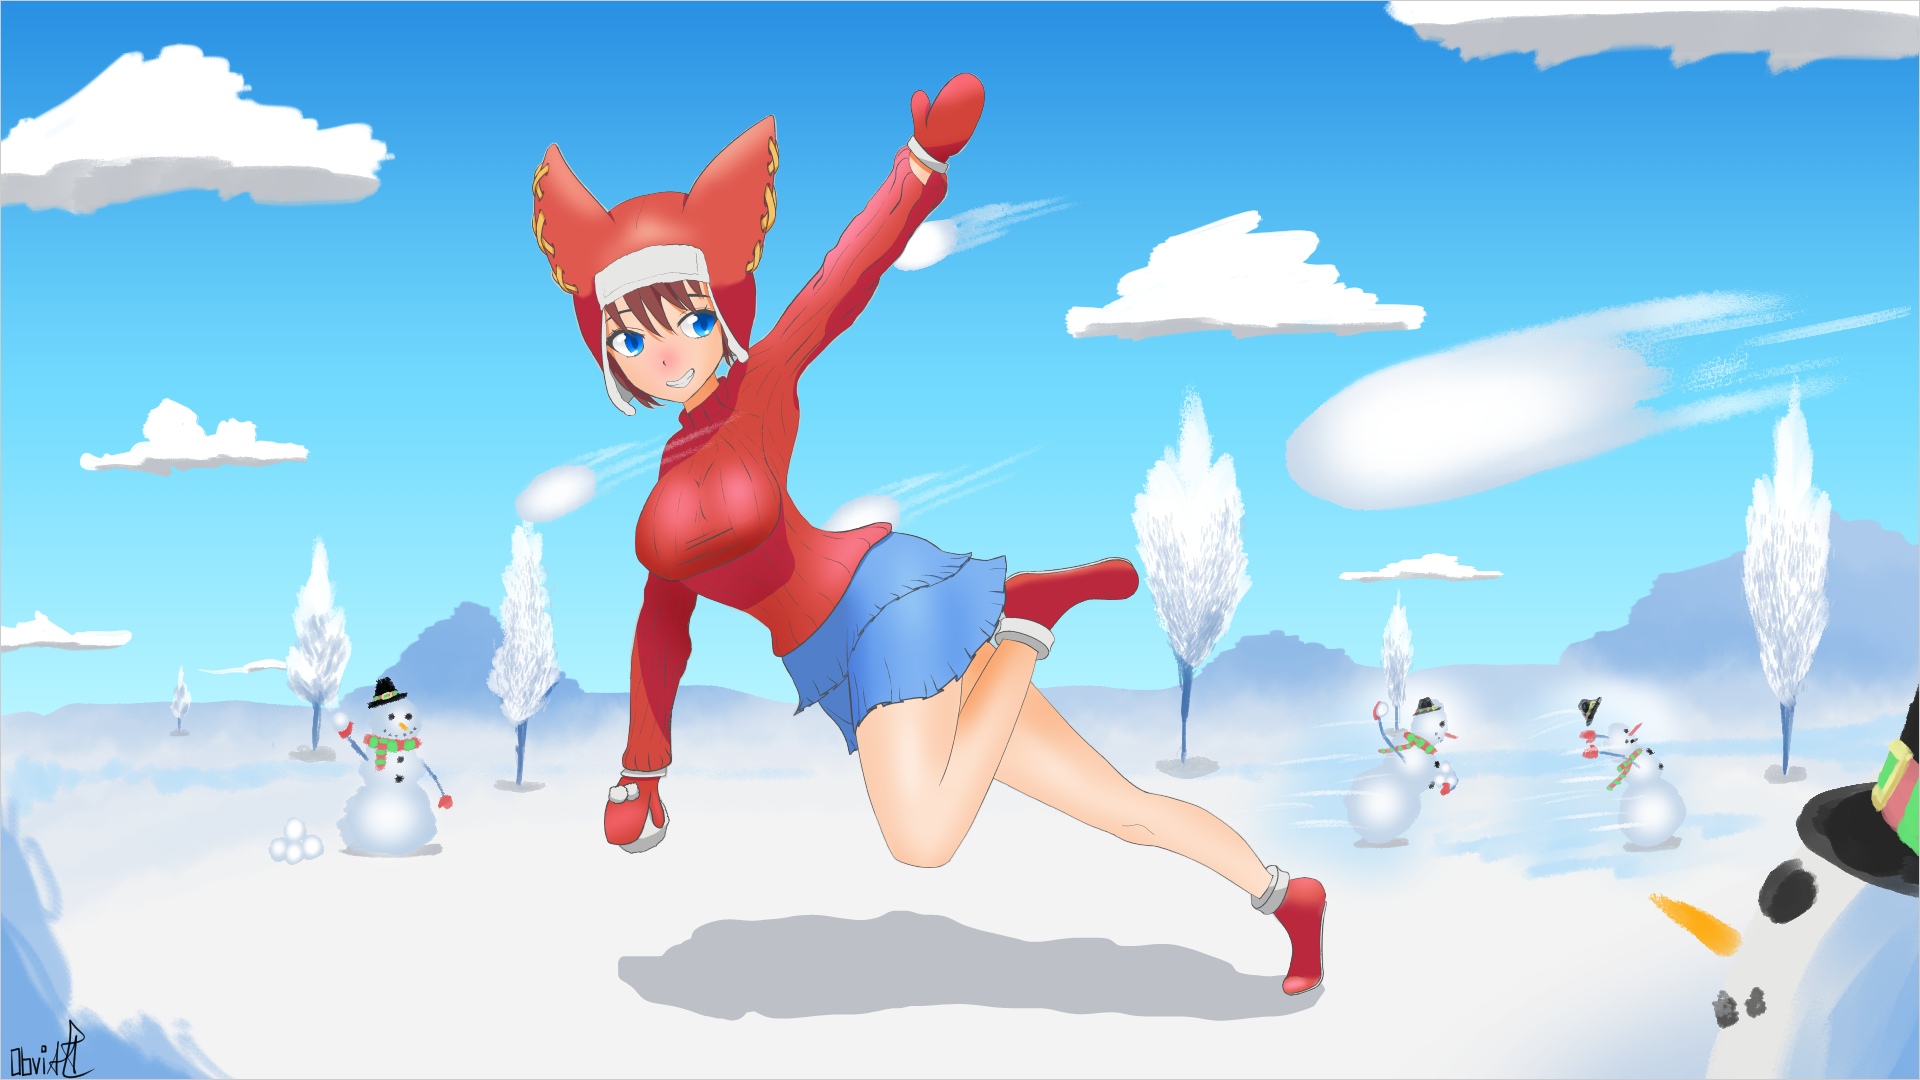 1920x1080 - Nordic Girl Playing in the Snow.png